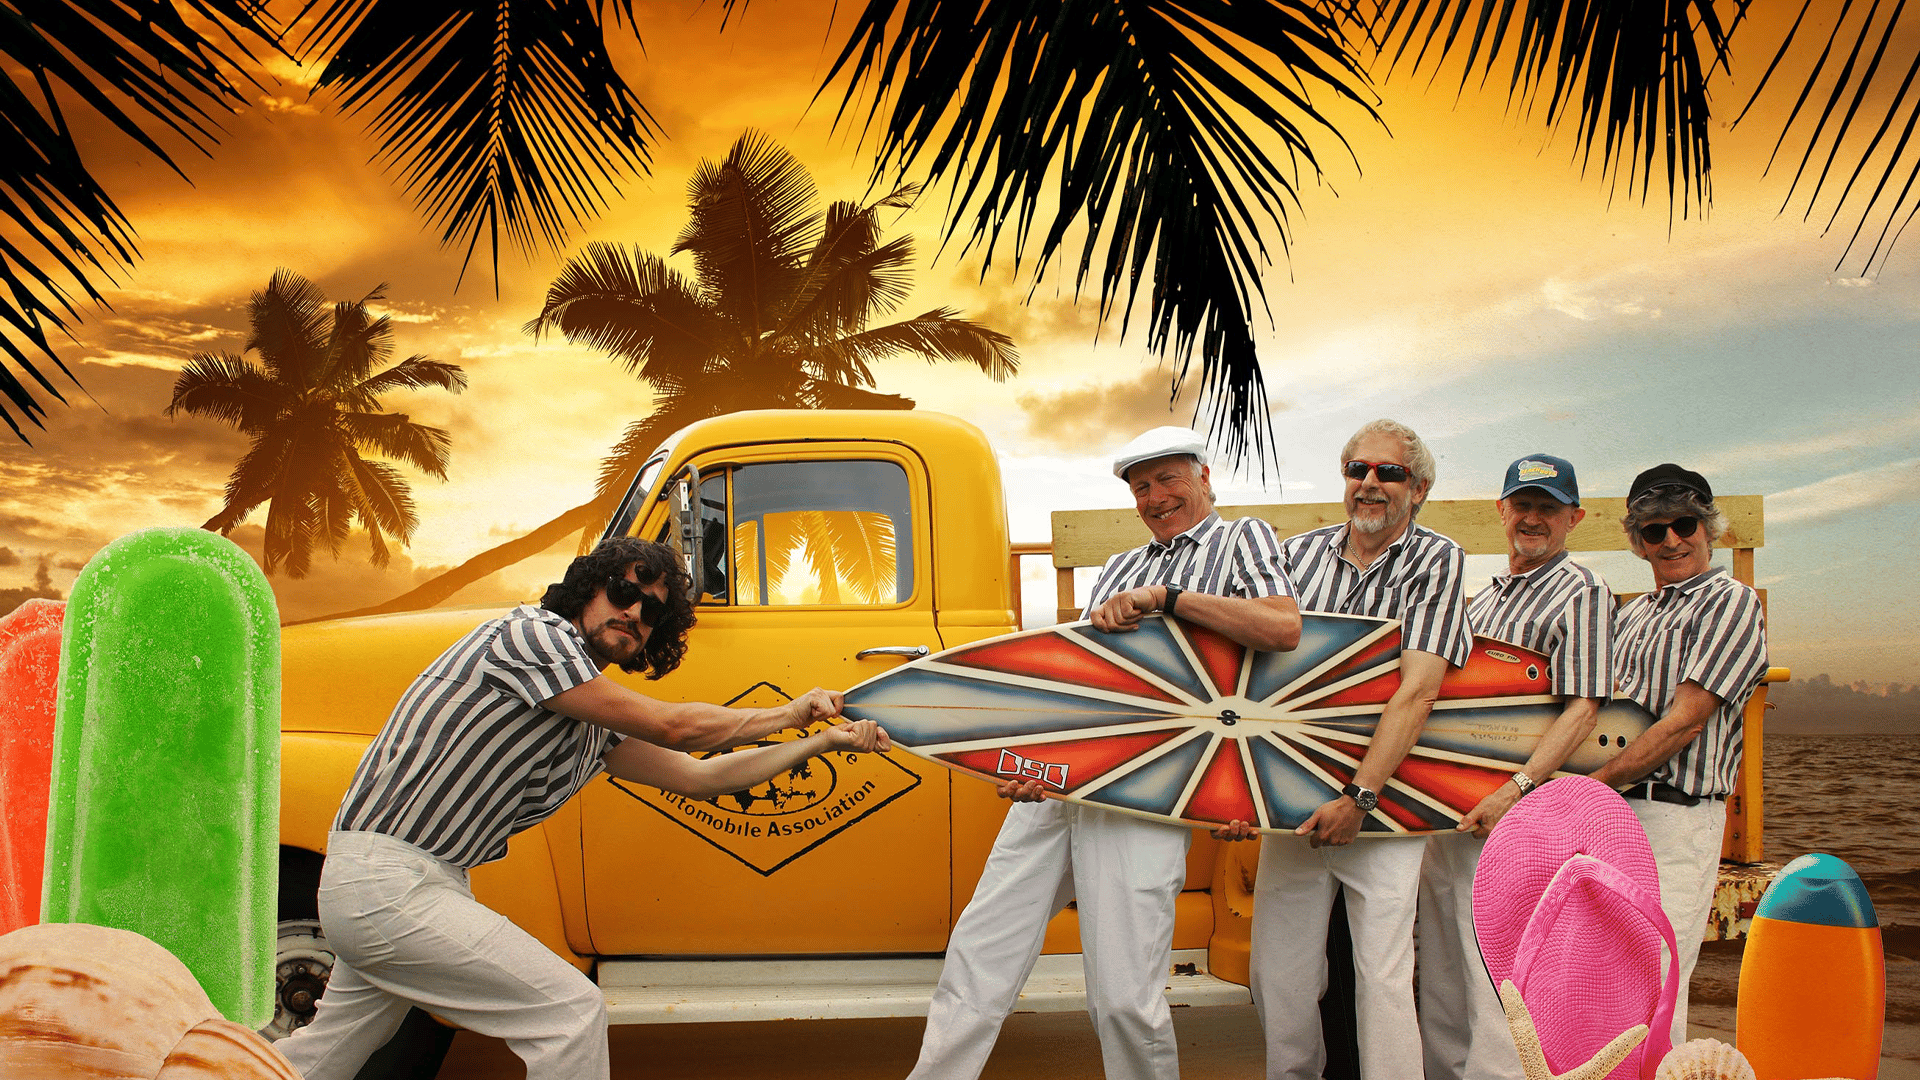 A man with black curly hair and sunglasses trying to pull a surf board from the arms of four other men. They are all wearing blue and white striped shirts and white trousers. They are in front of a yellow truck on a beach with lots of palm trees.